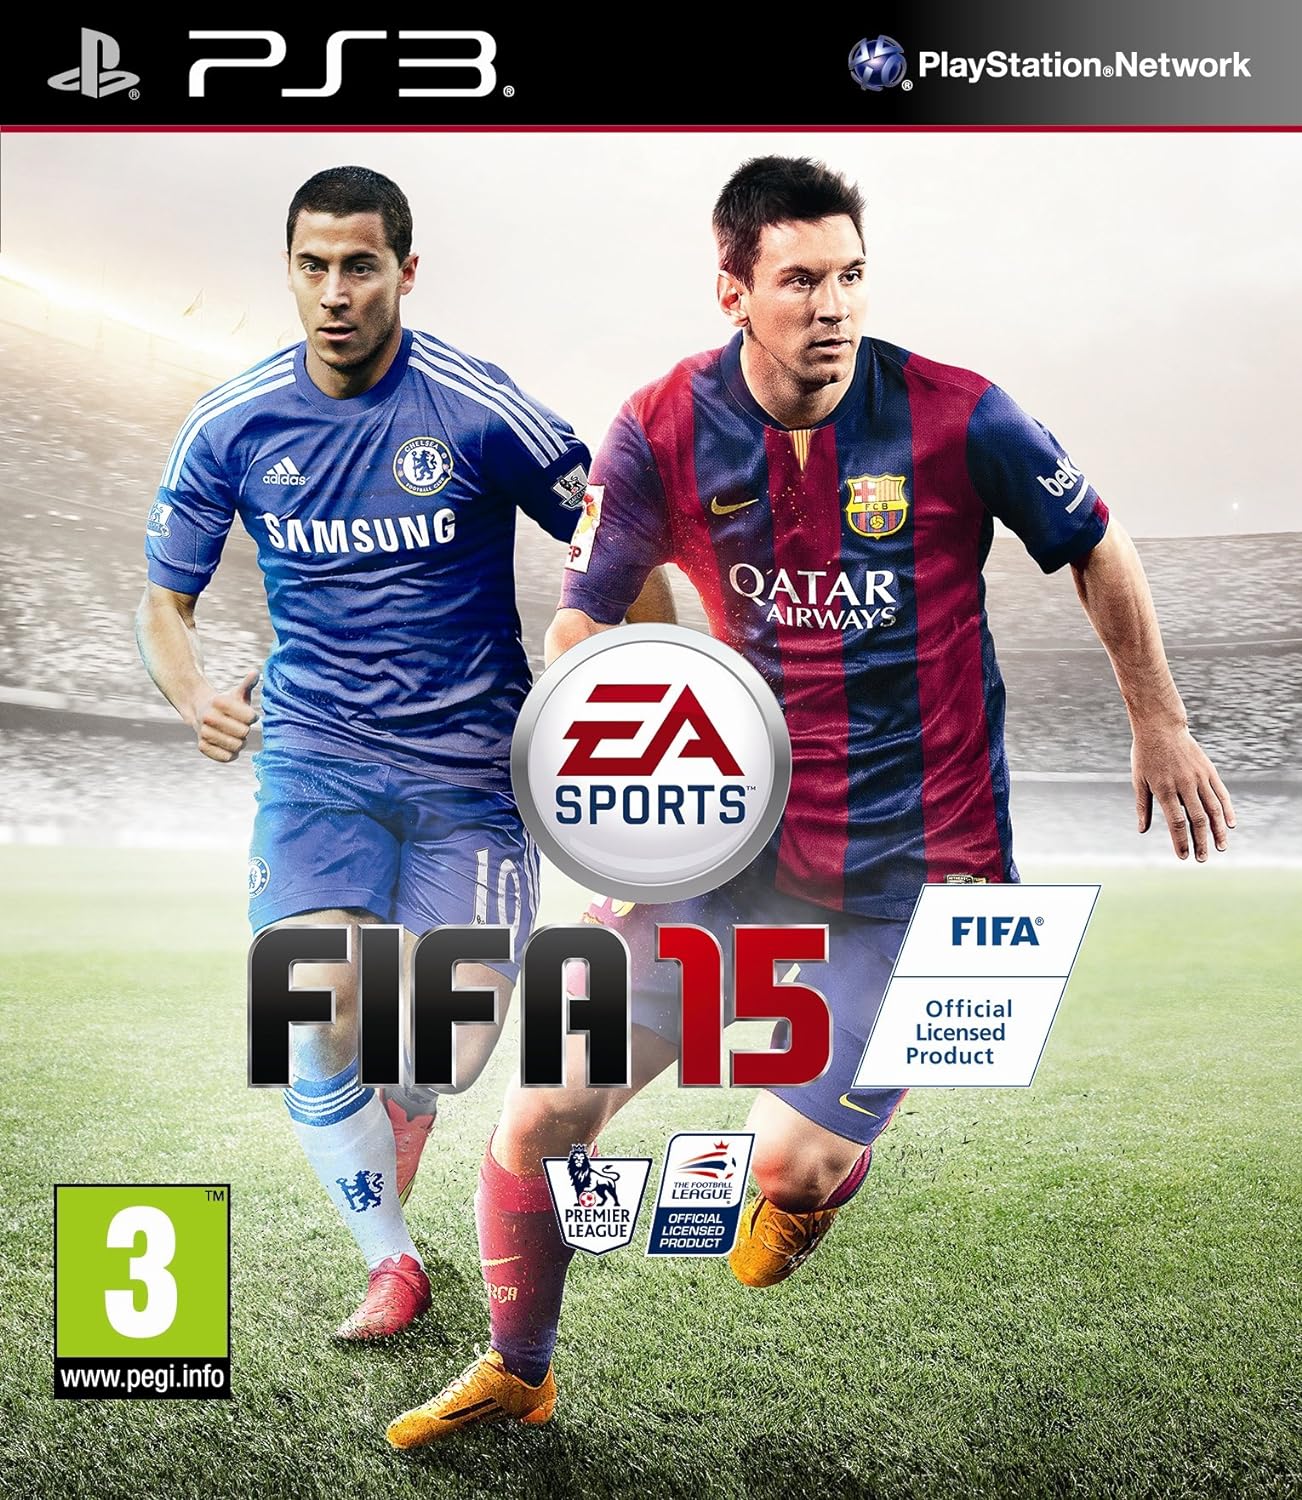 FIFA 15 (PS3) (Pre-owned)